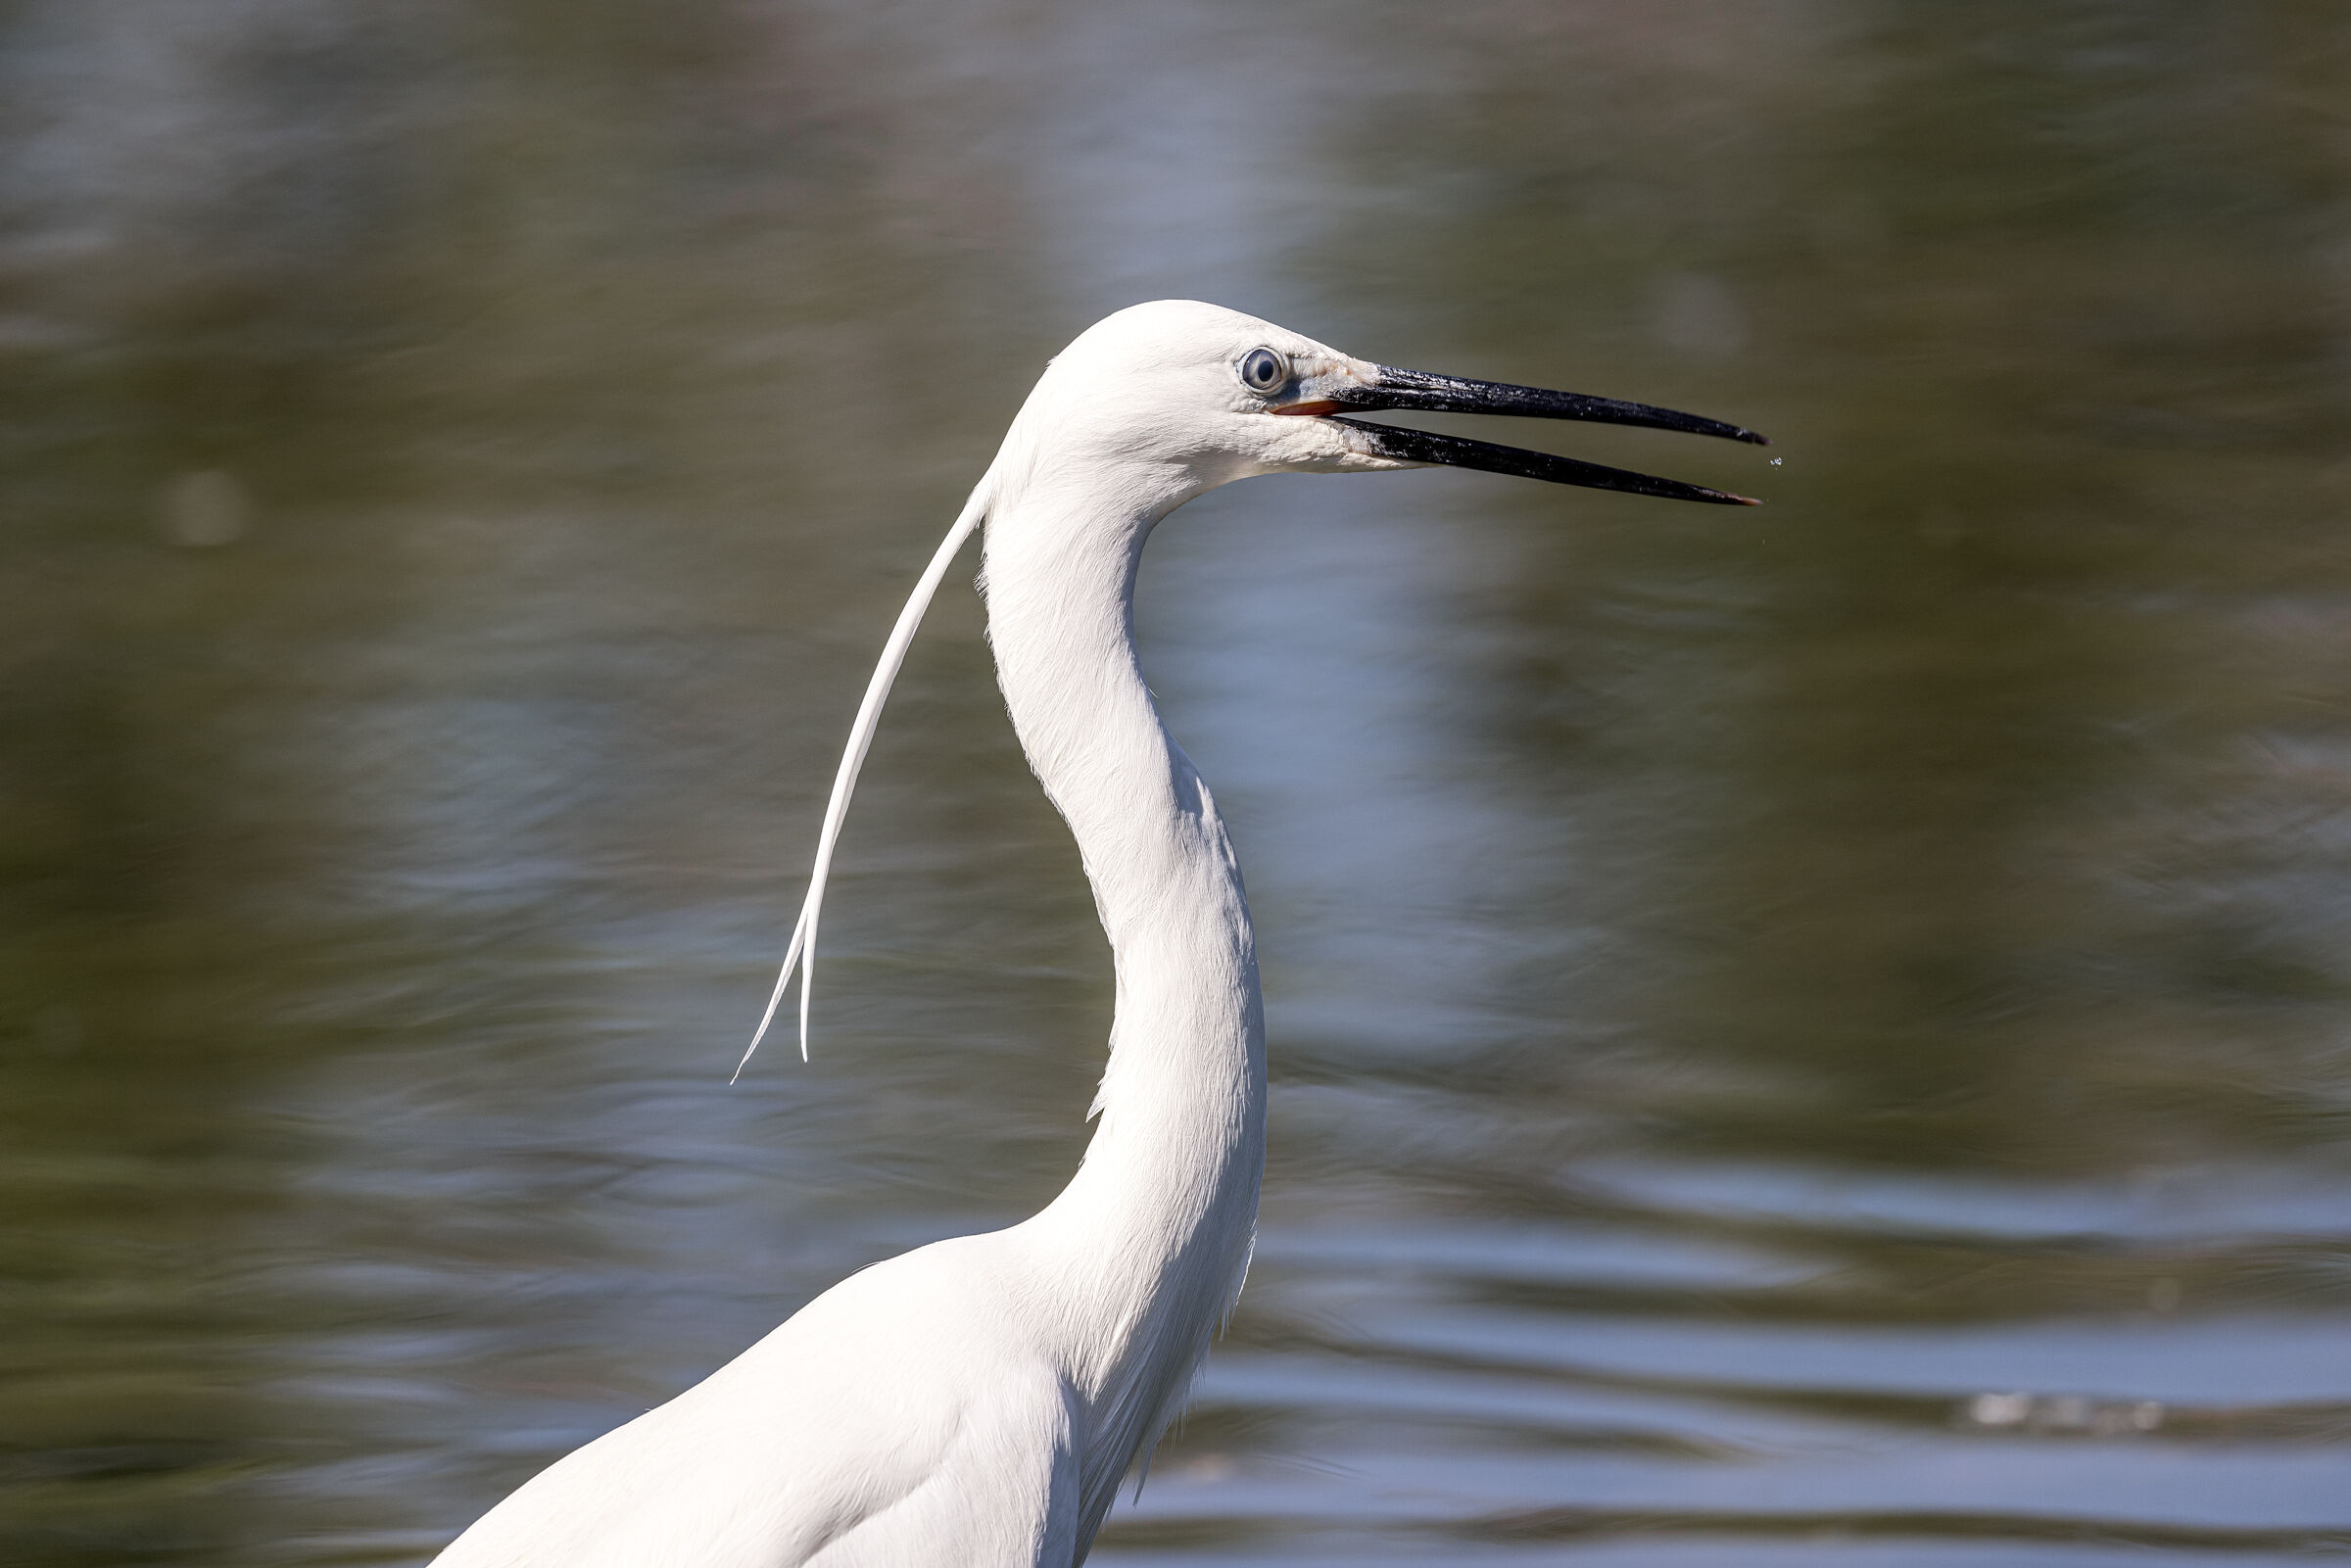 the profile of the egret...